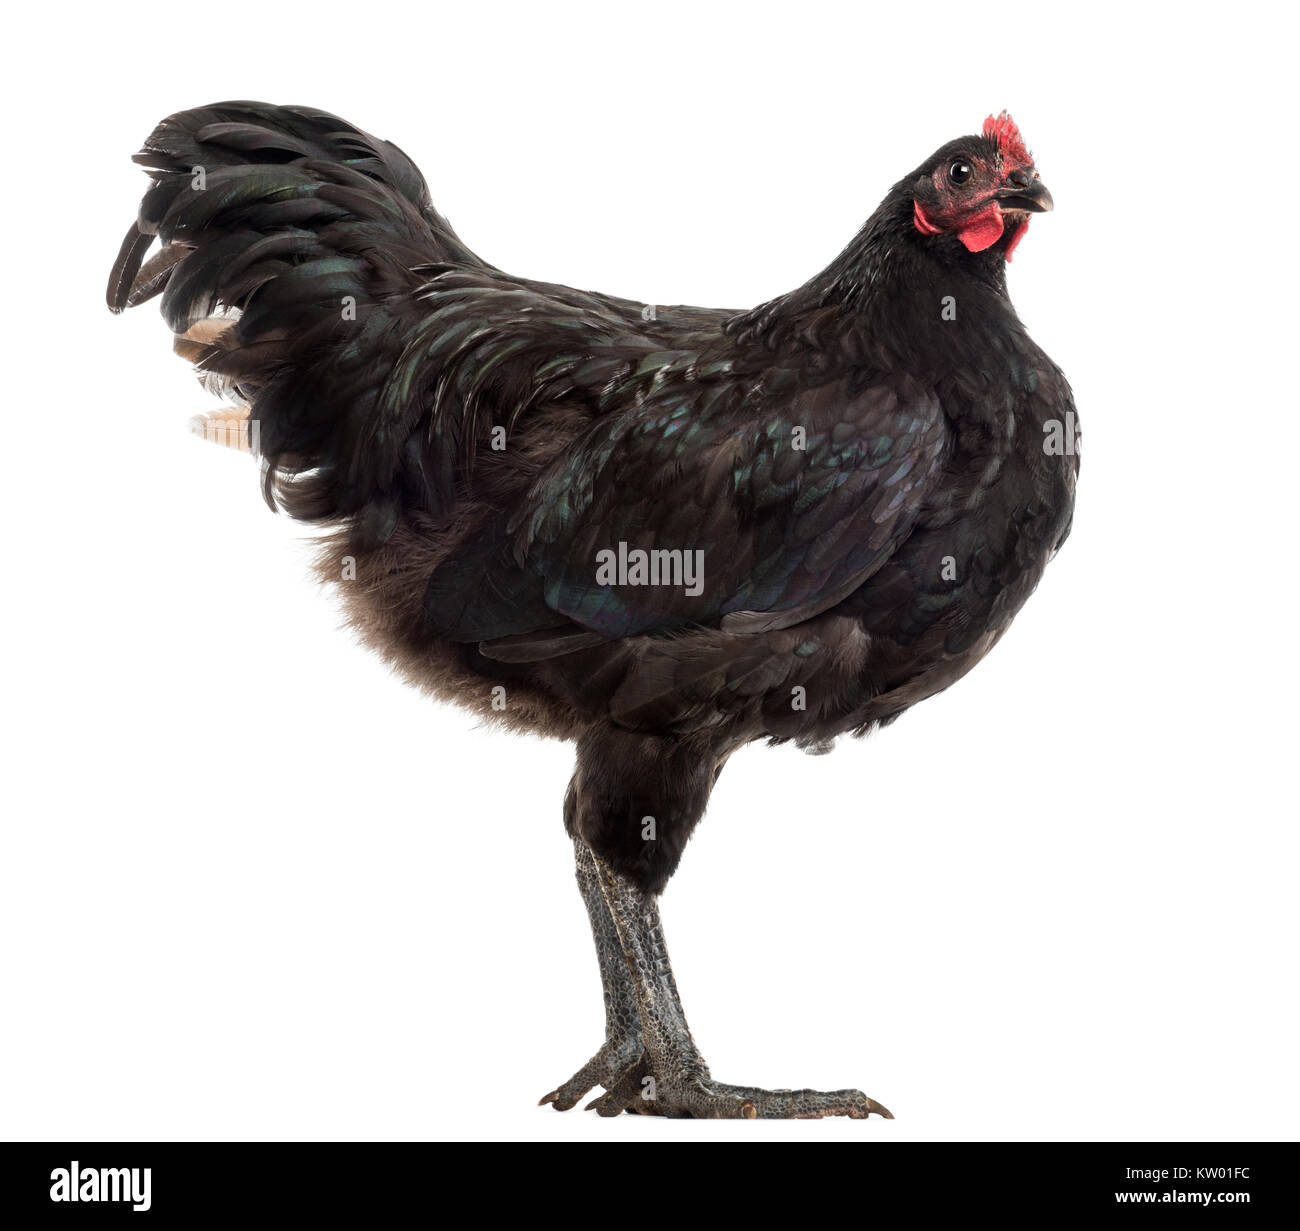 Australorp, 5 months old, against white background Stock Photo